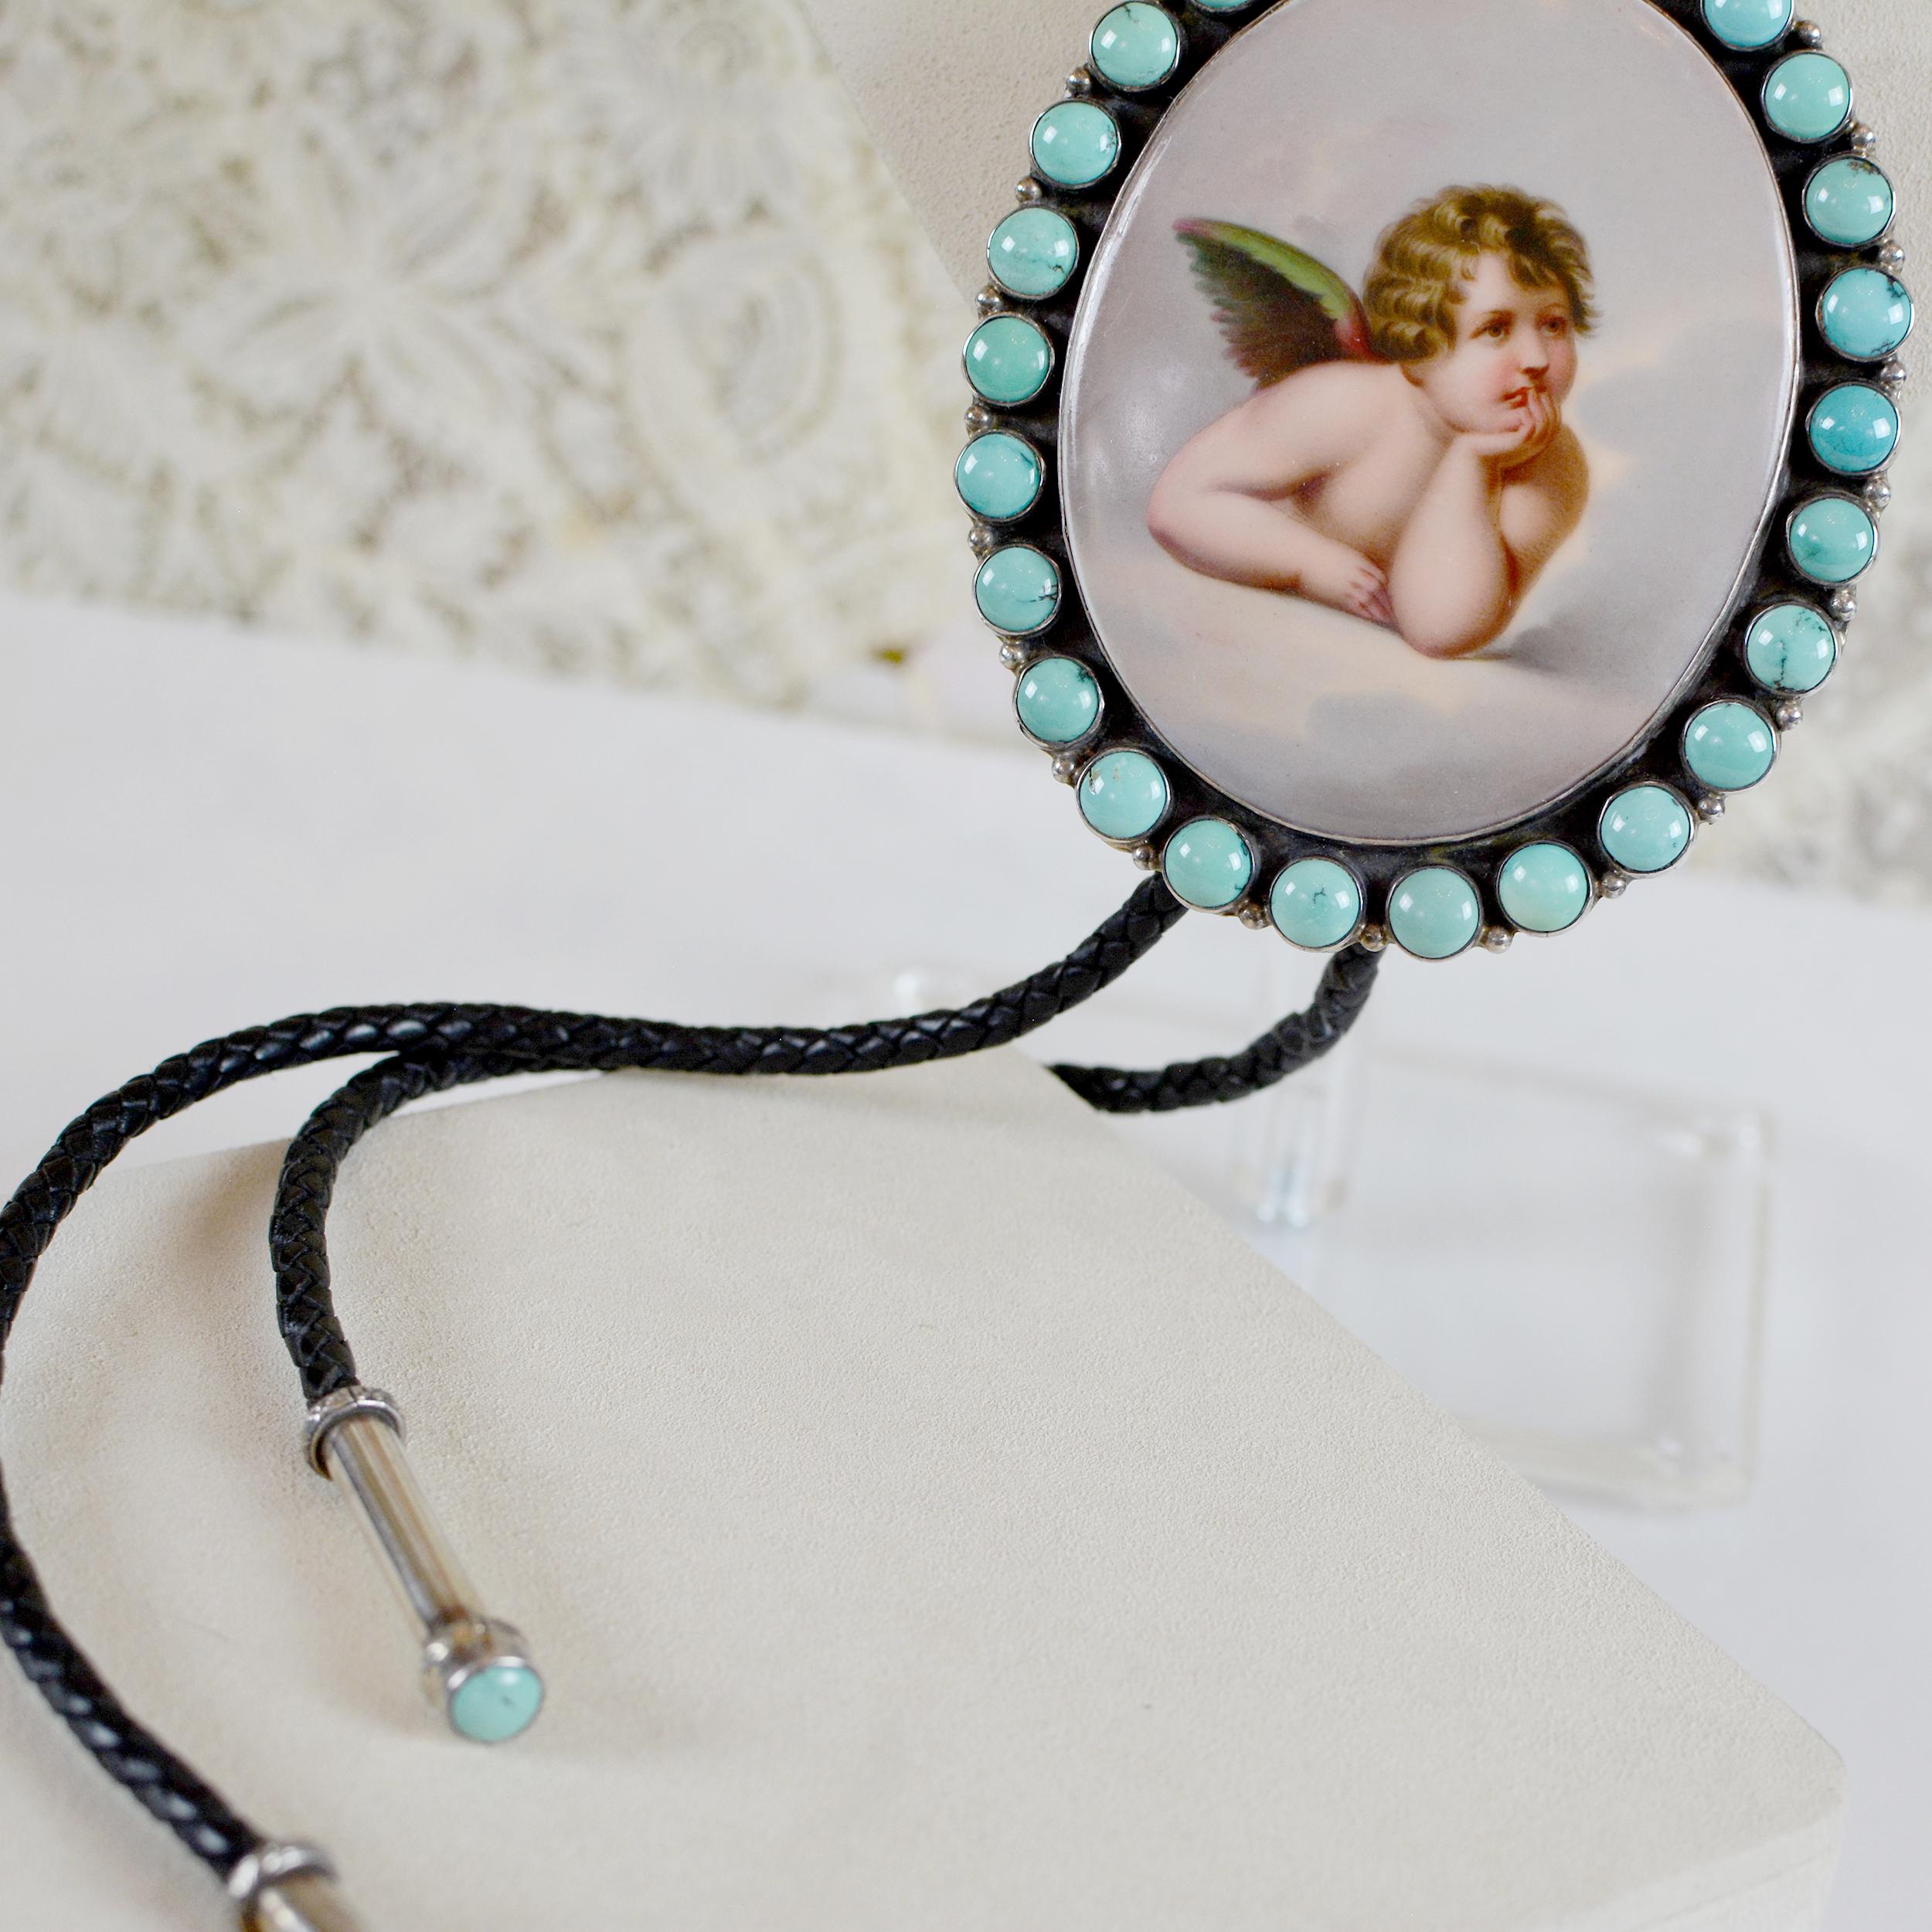 Jill Garber 19th Century Sistine Madonna Angel Portrait with Turquoise Bolo Tie  For Sale 5